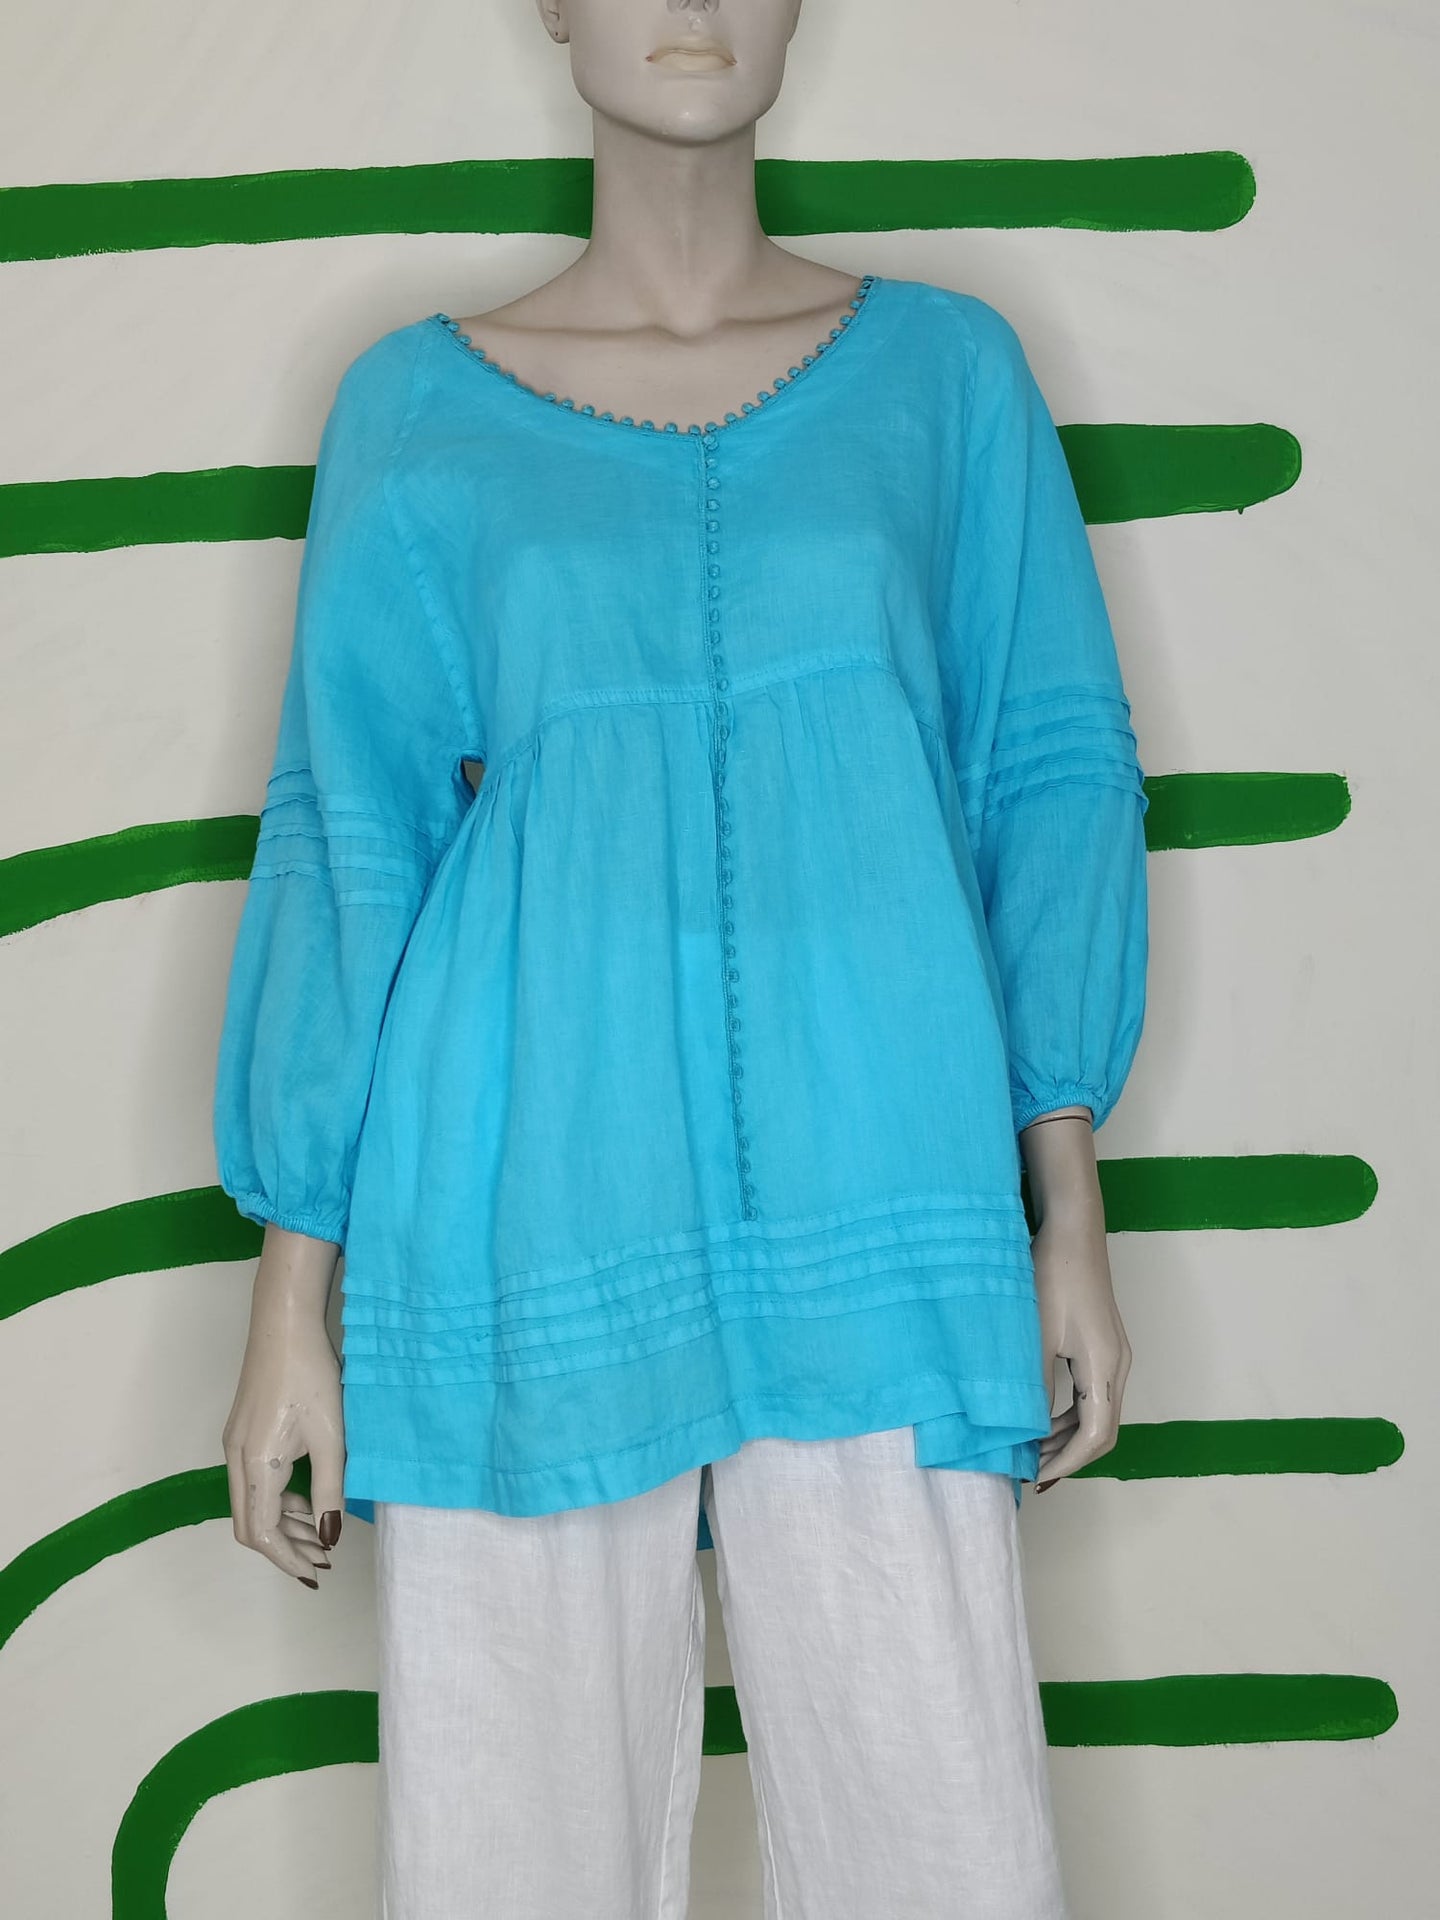 Blue detailed tunic